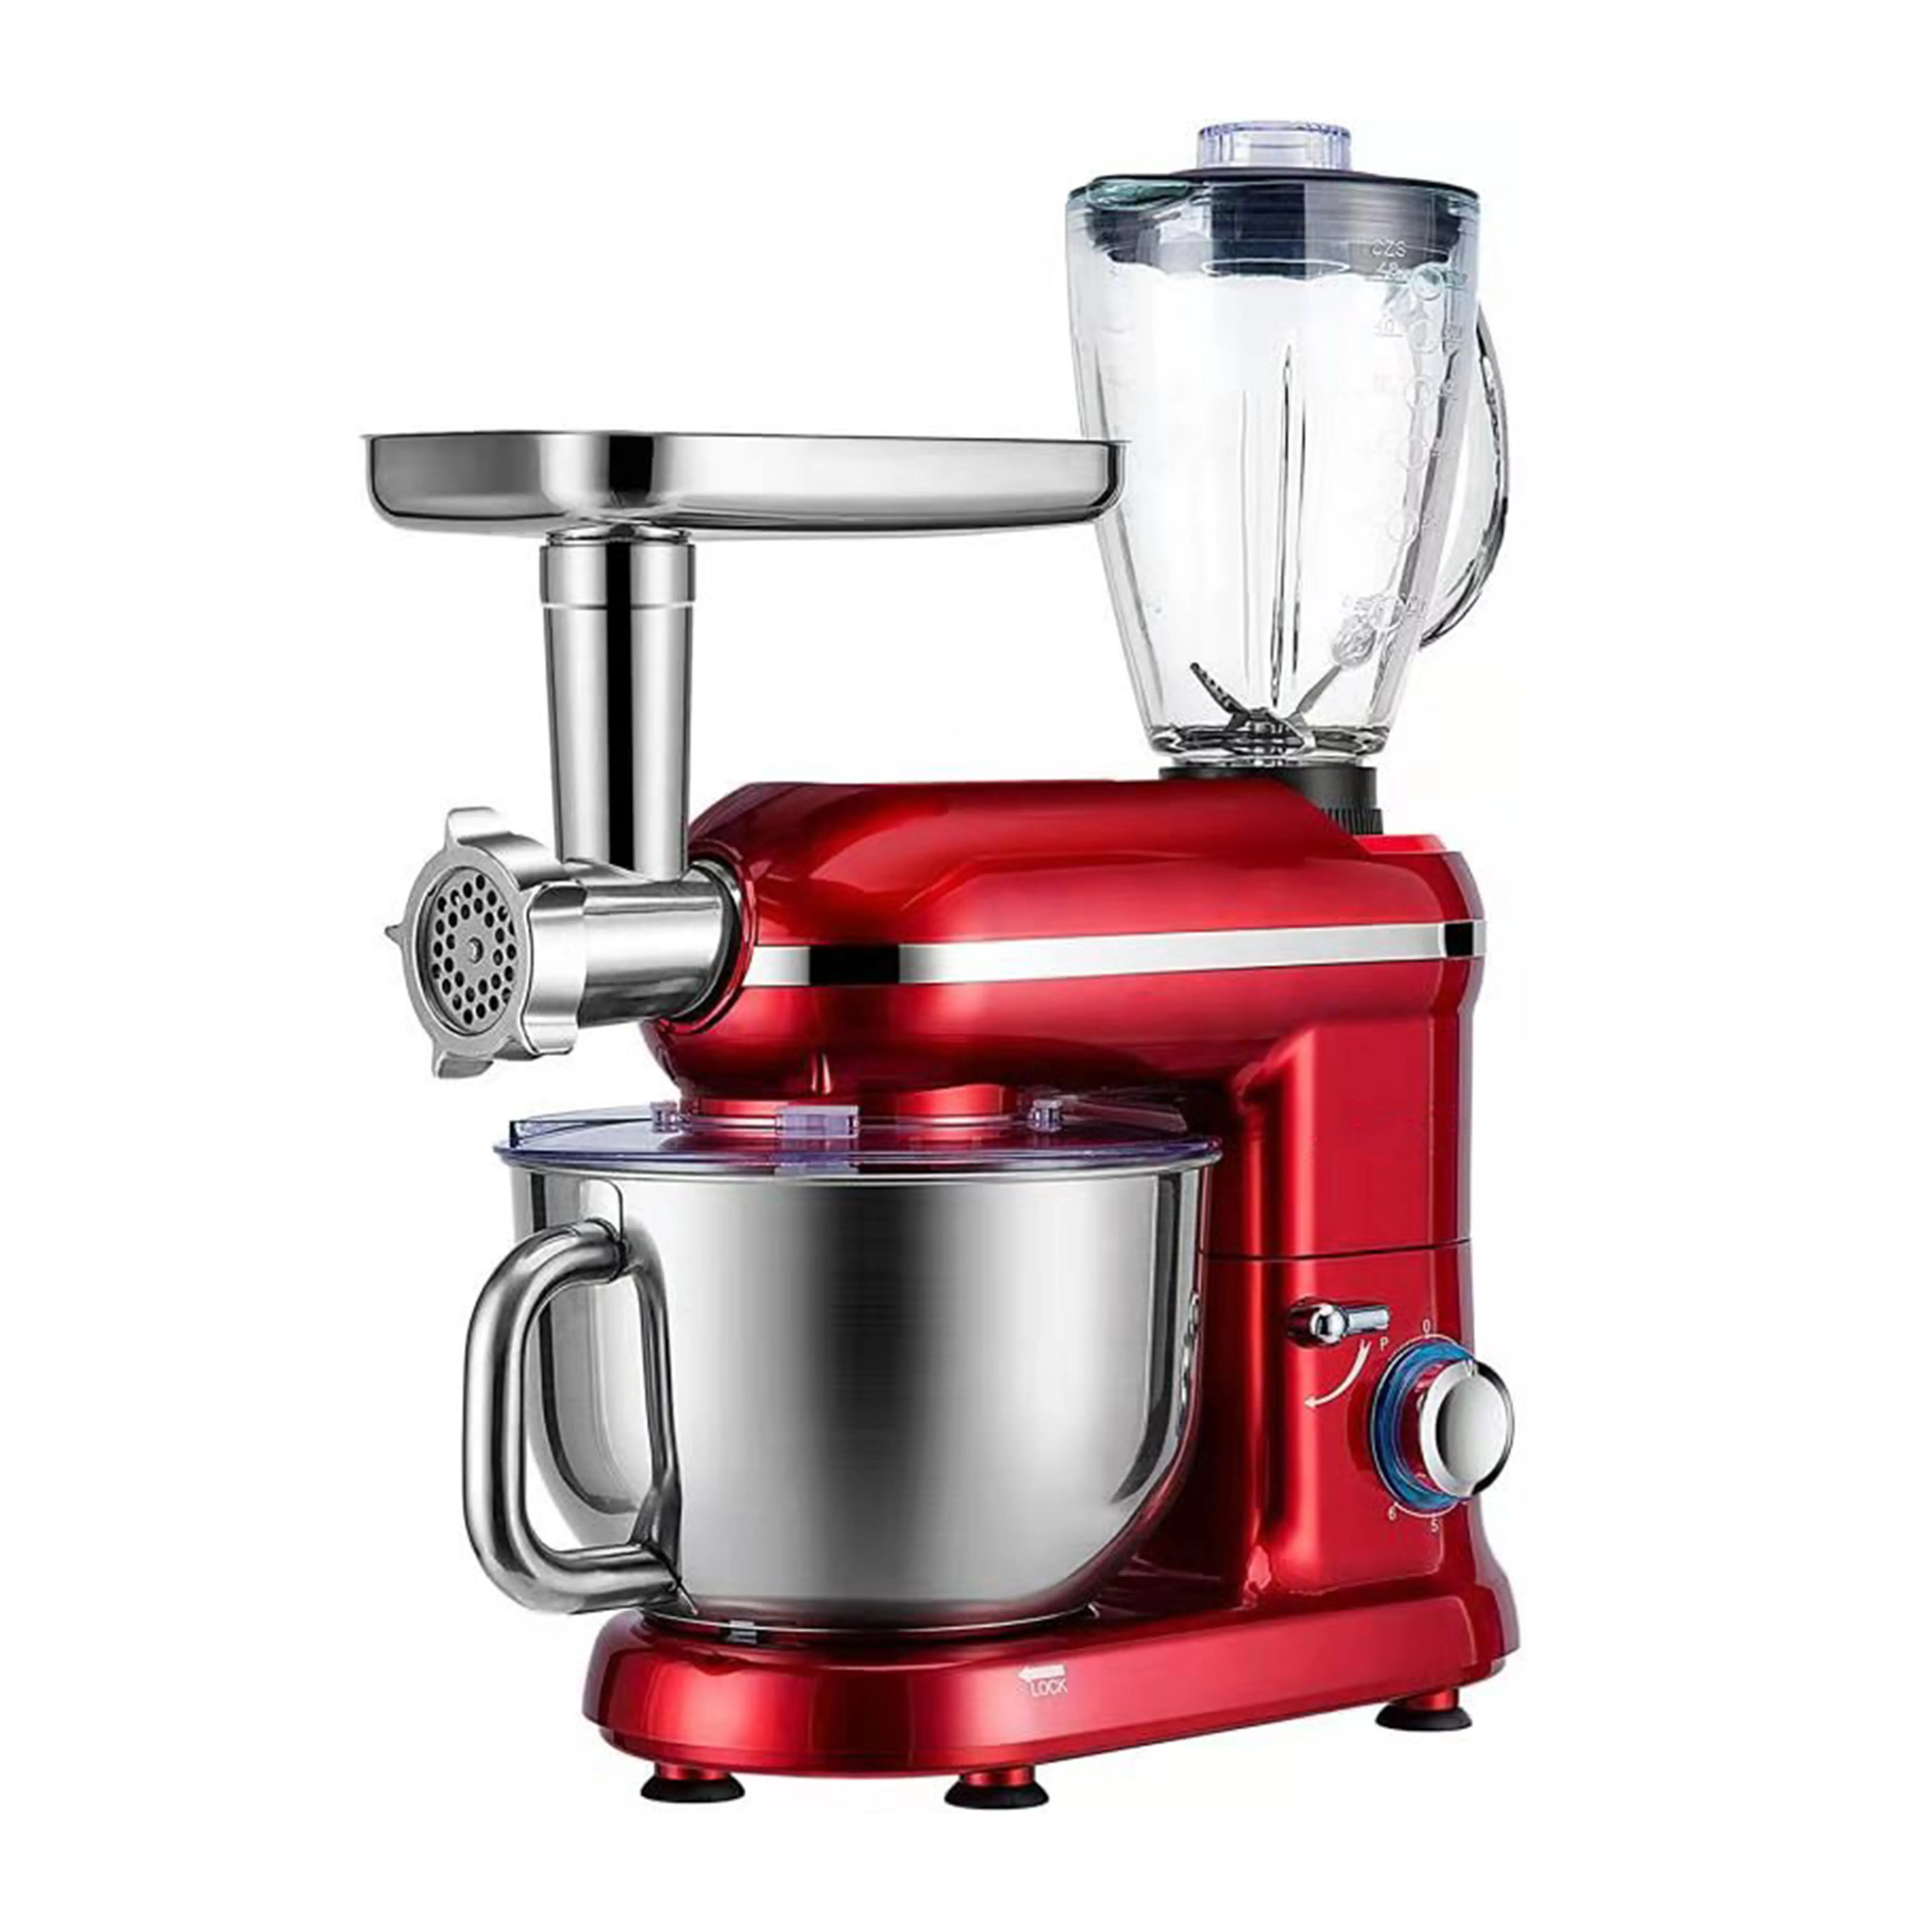 3 In 1 Multifunctional Kitchenaid Stand Electric Food Processor Mixer